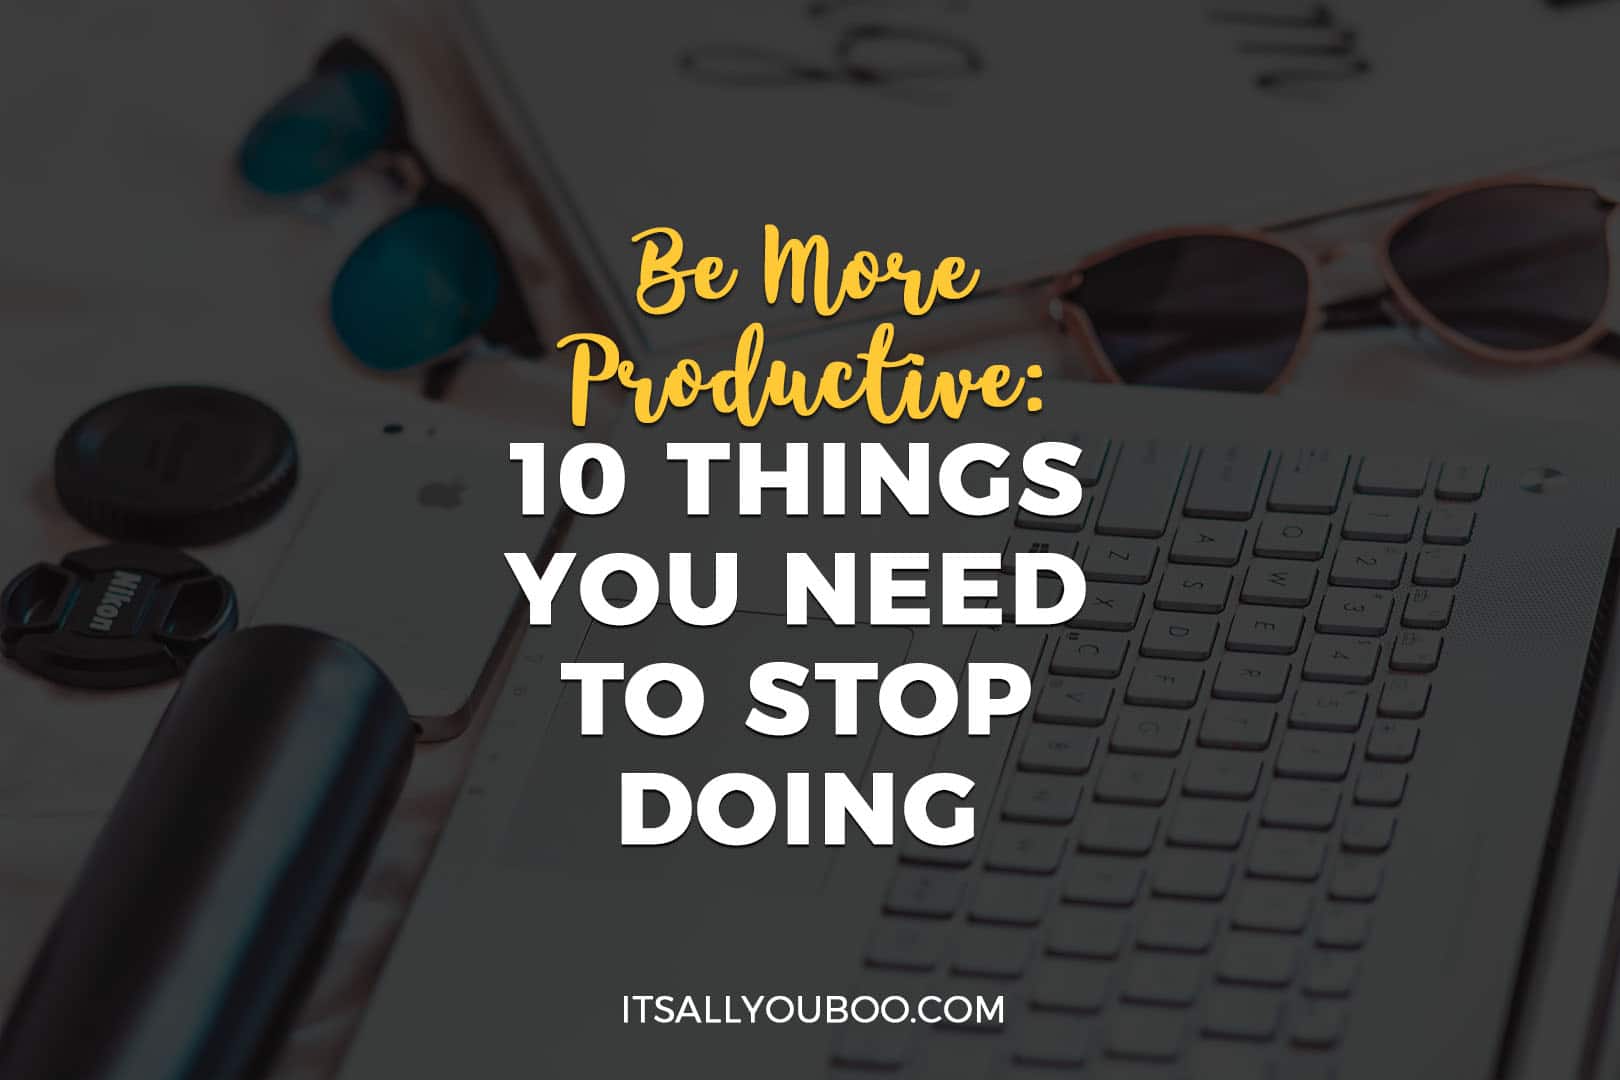 Be More Productive: 10 Things You Need to Stop Doing